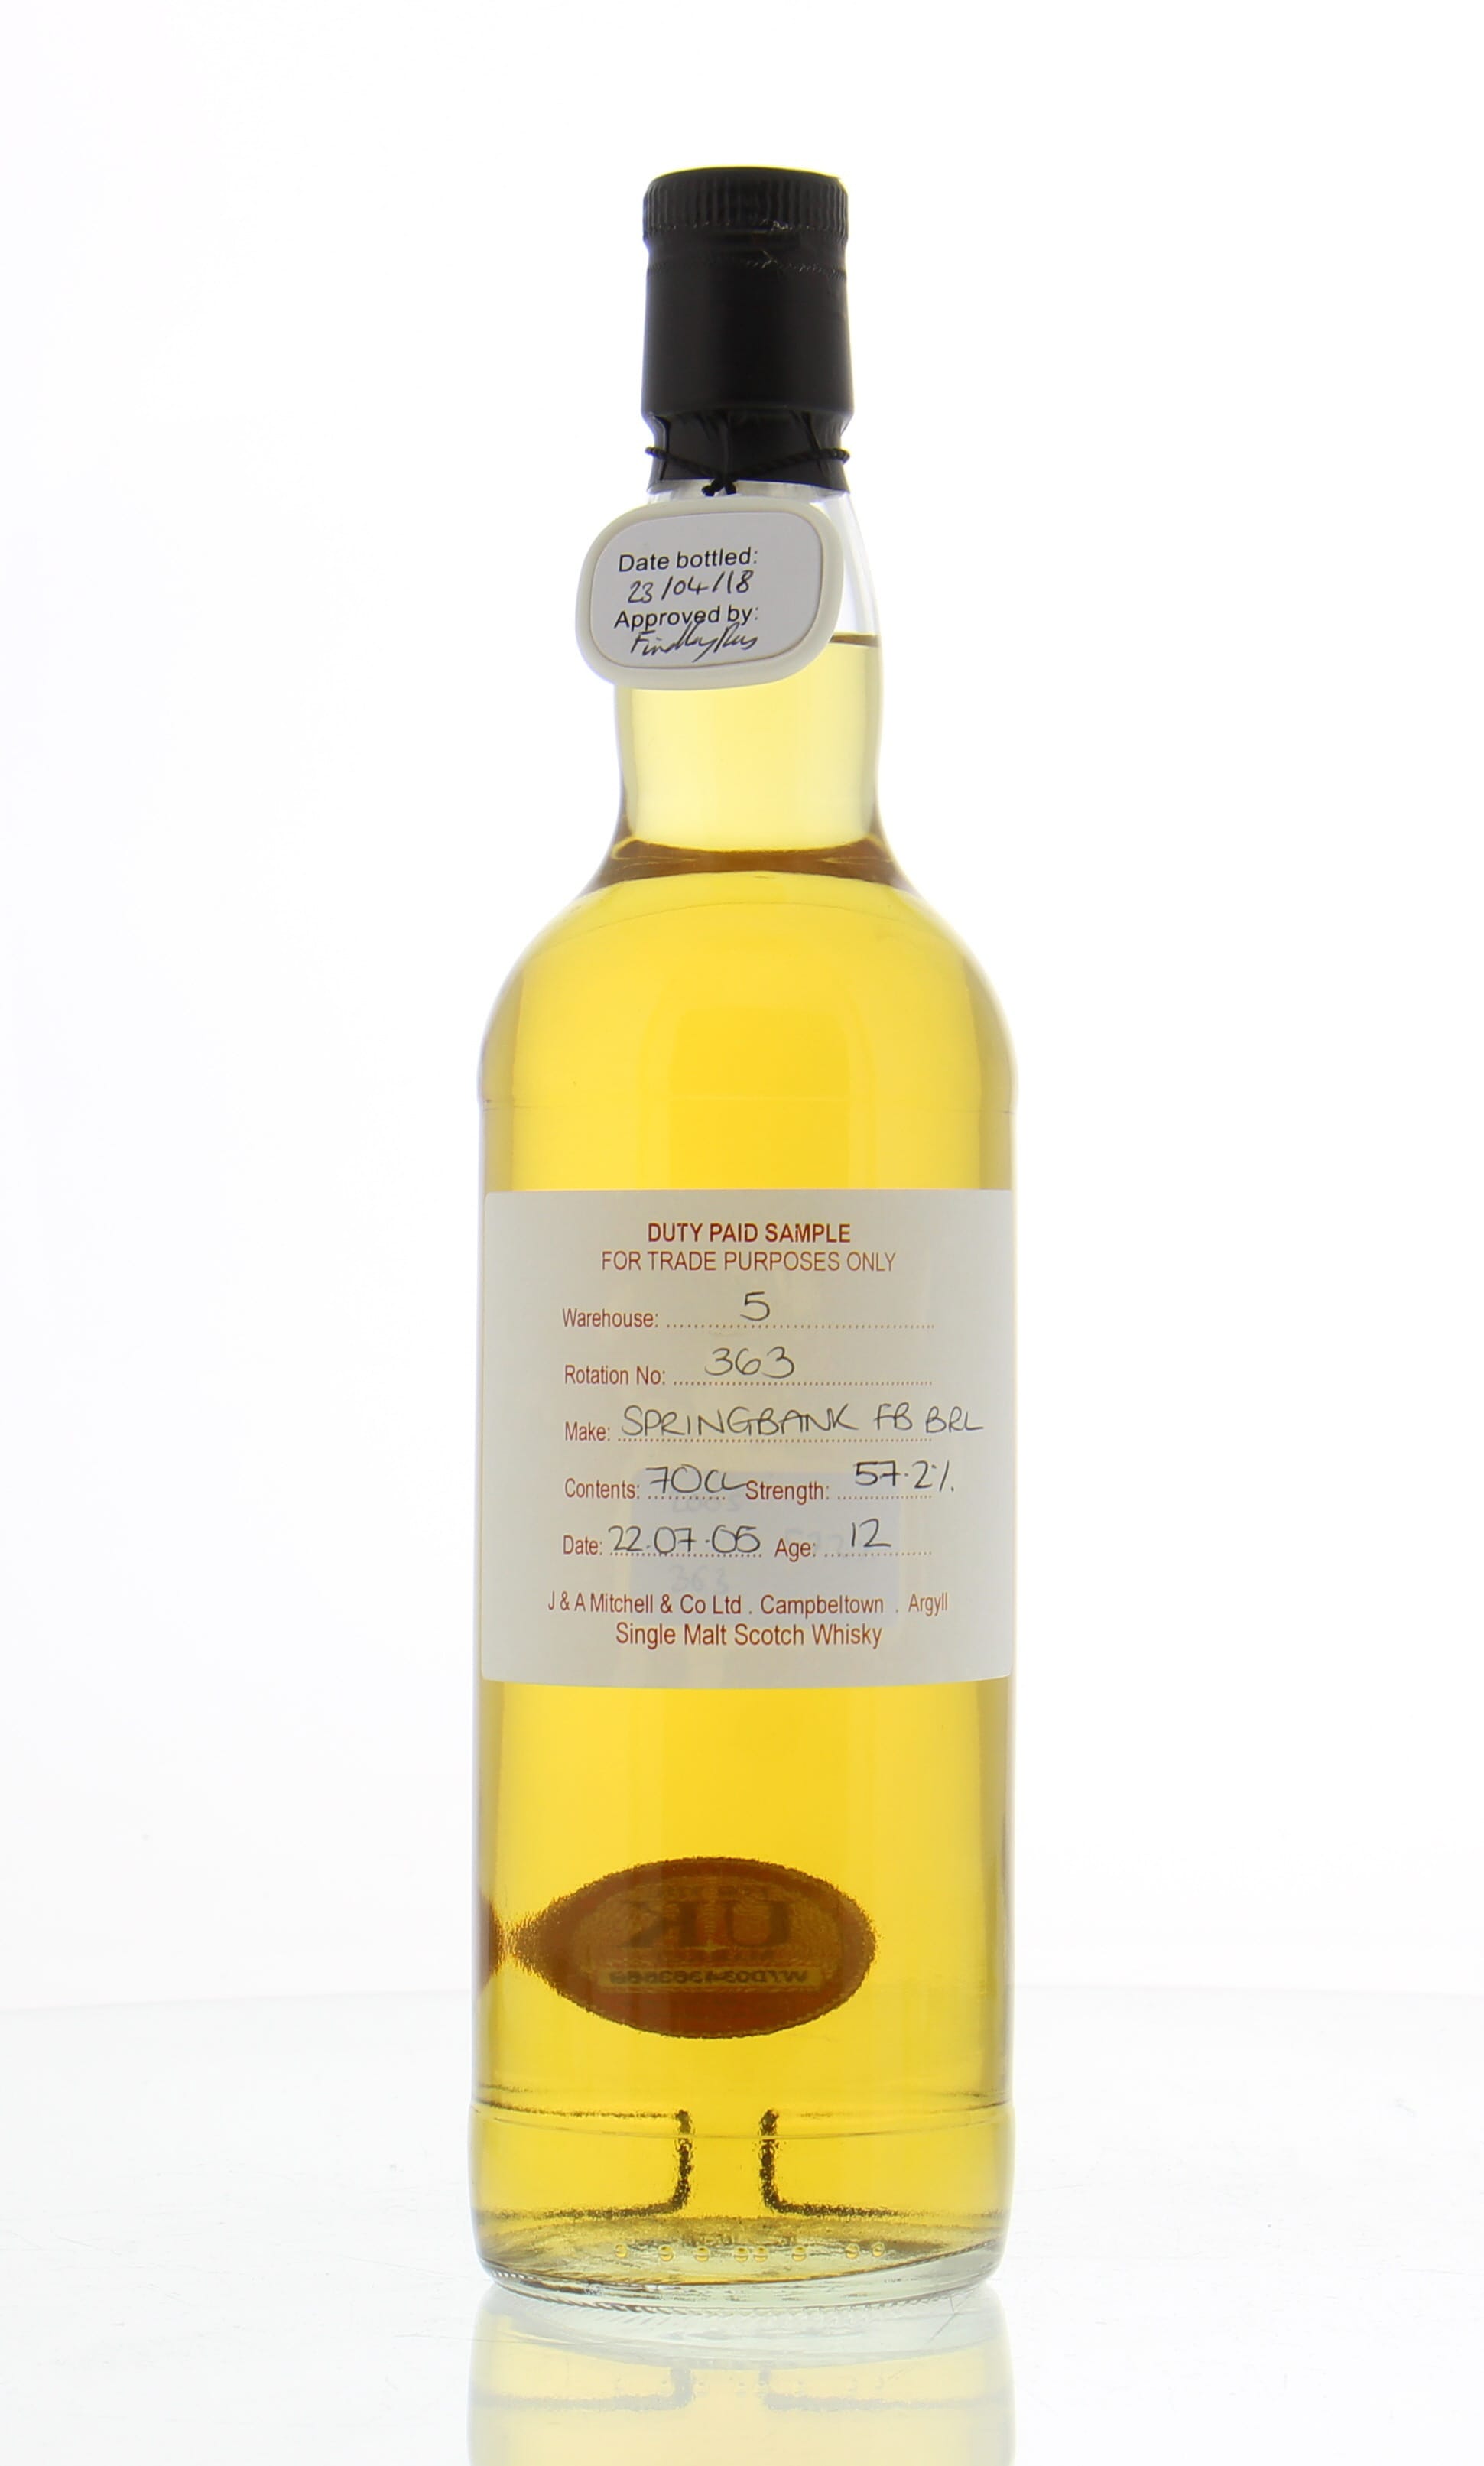 Springbank - 12 Years Old Duty Paid Sample Warehouse 5 Rotation 363 57.2% 2005 Perfect